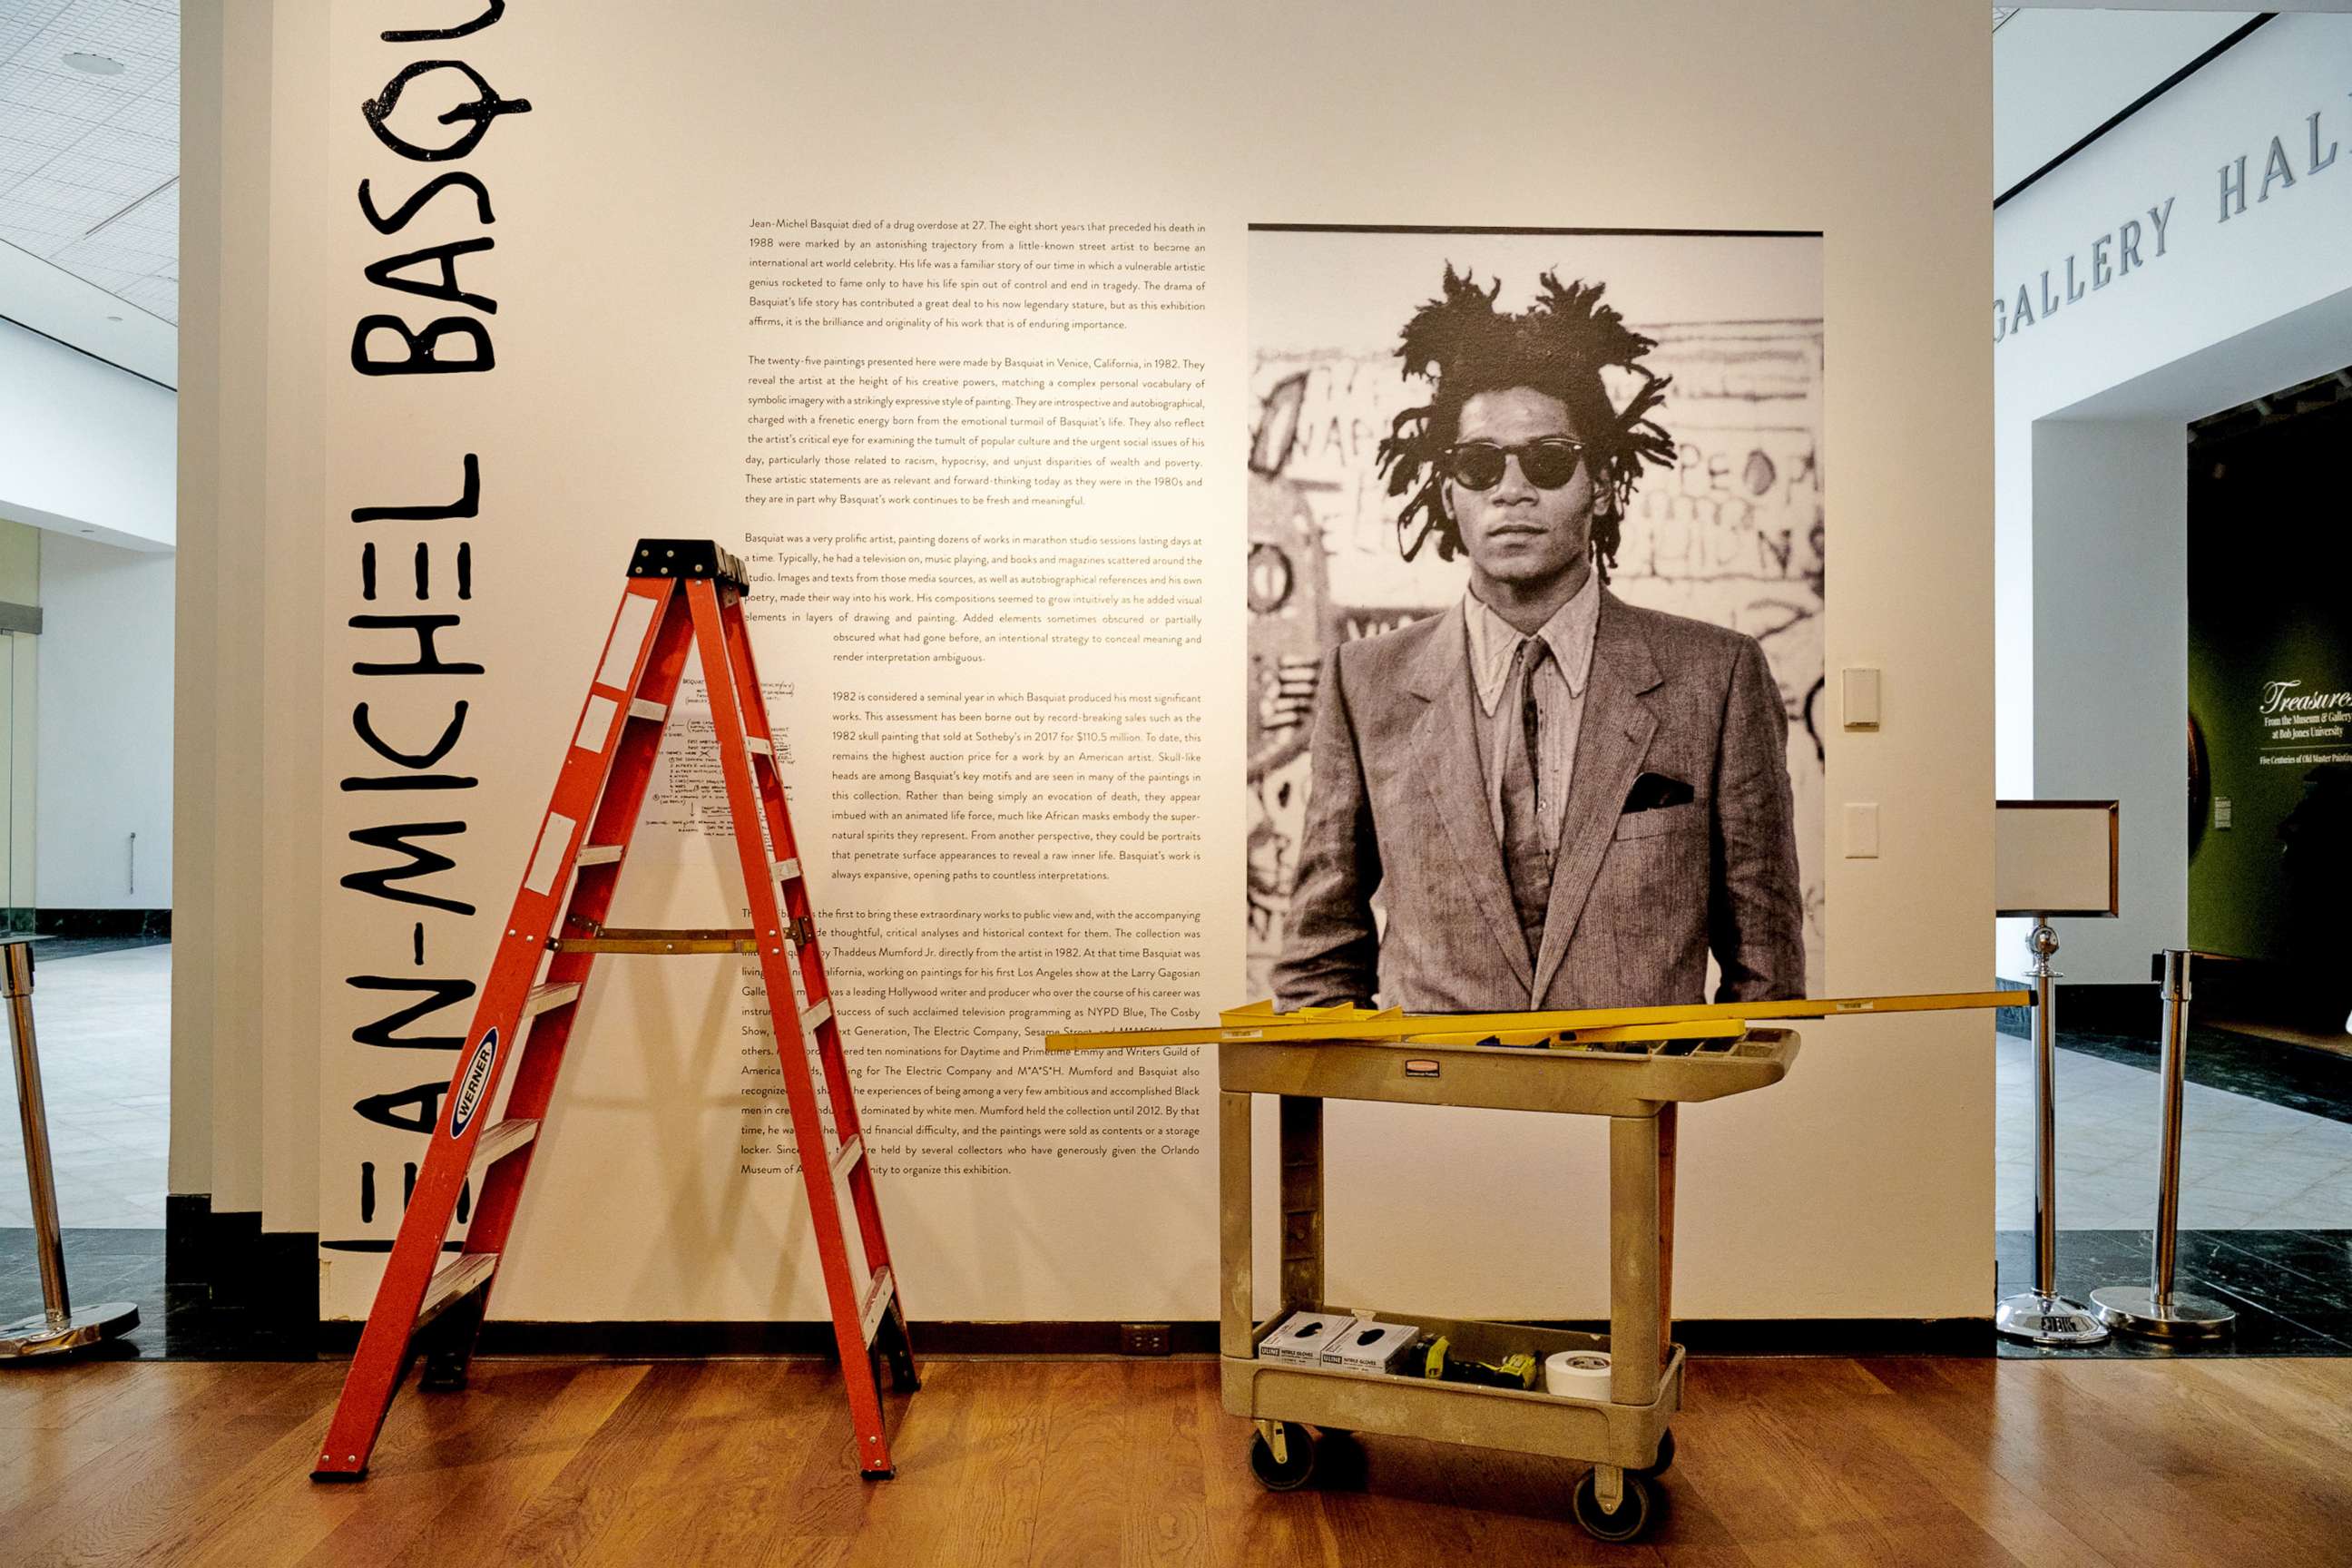 PHOTO: In this Feb. 2, 2022, file photo, the sign for the exhibit "Heroes & Monsters: Jean-Michel Basquiat" is shown at the Orlando Museum of Art, in Orlando, Fla.